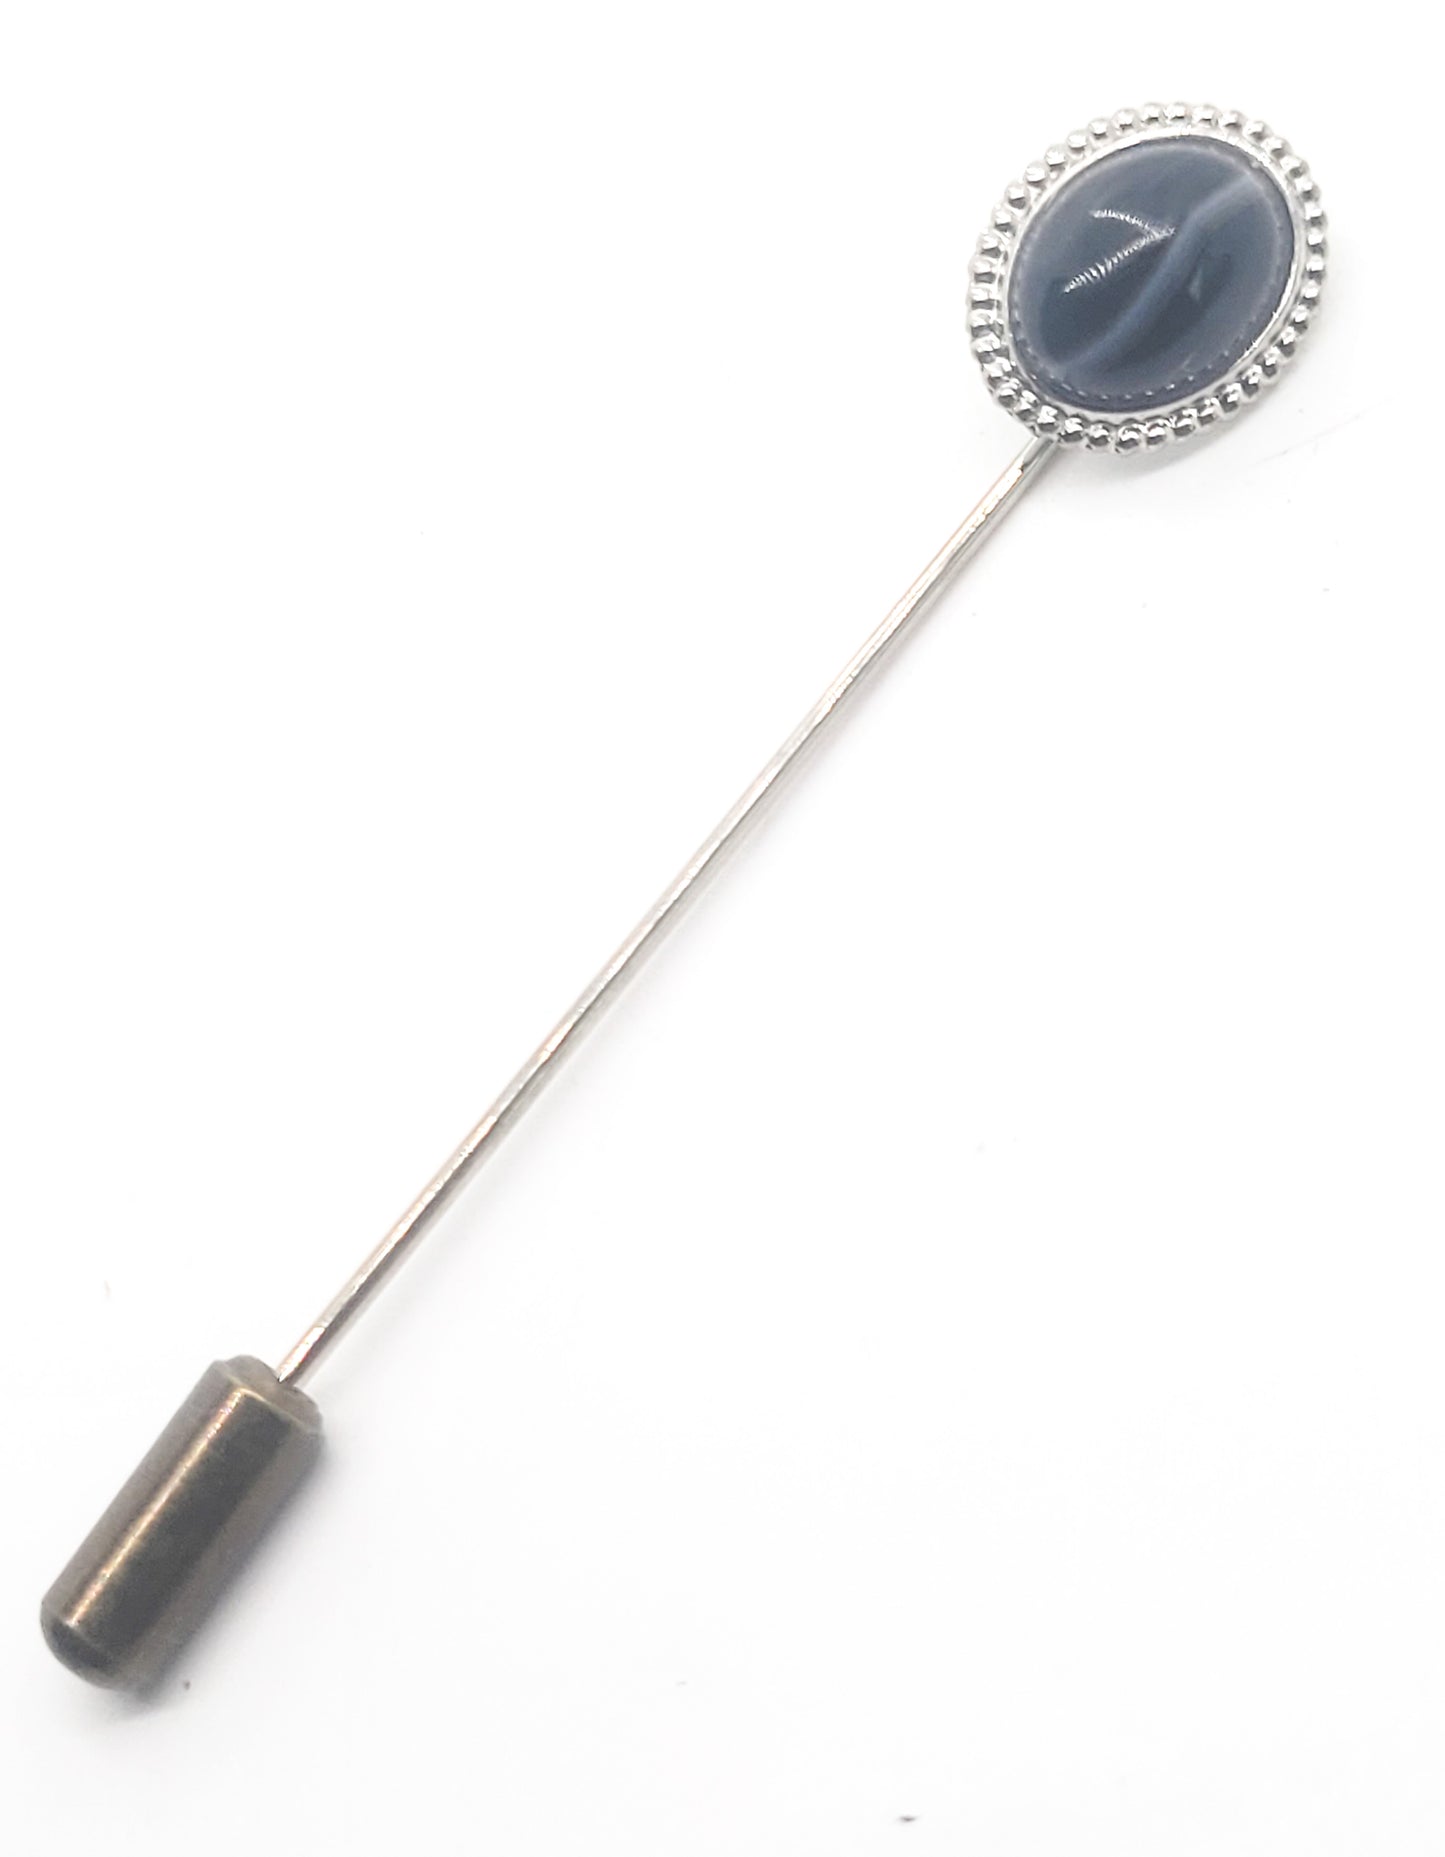 Black banded Agate vintage silver toned stick lapel pin